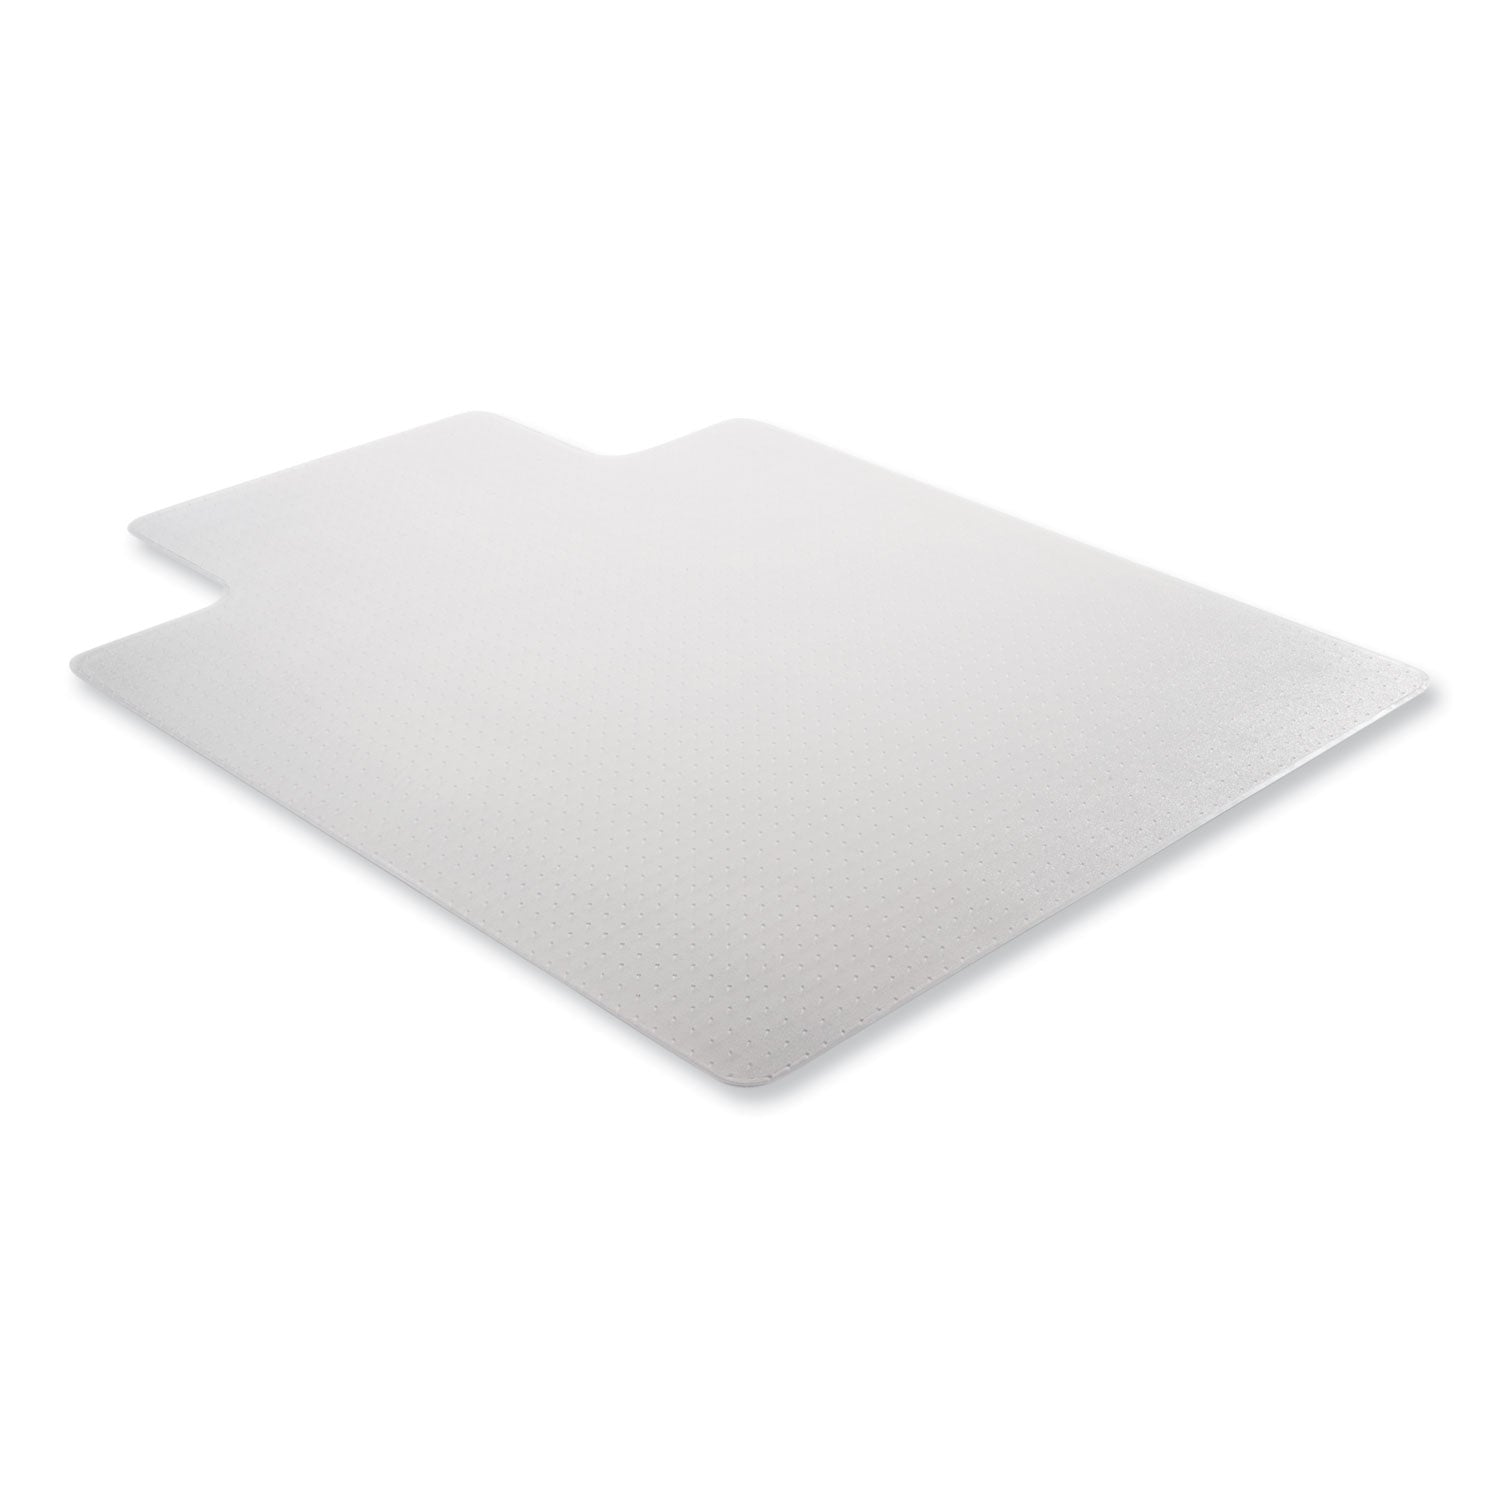 supermat-frequent-use-chair-mat-med-pile-carpet-roll-36-x-48-lipped-clear_defcm14113com - 8